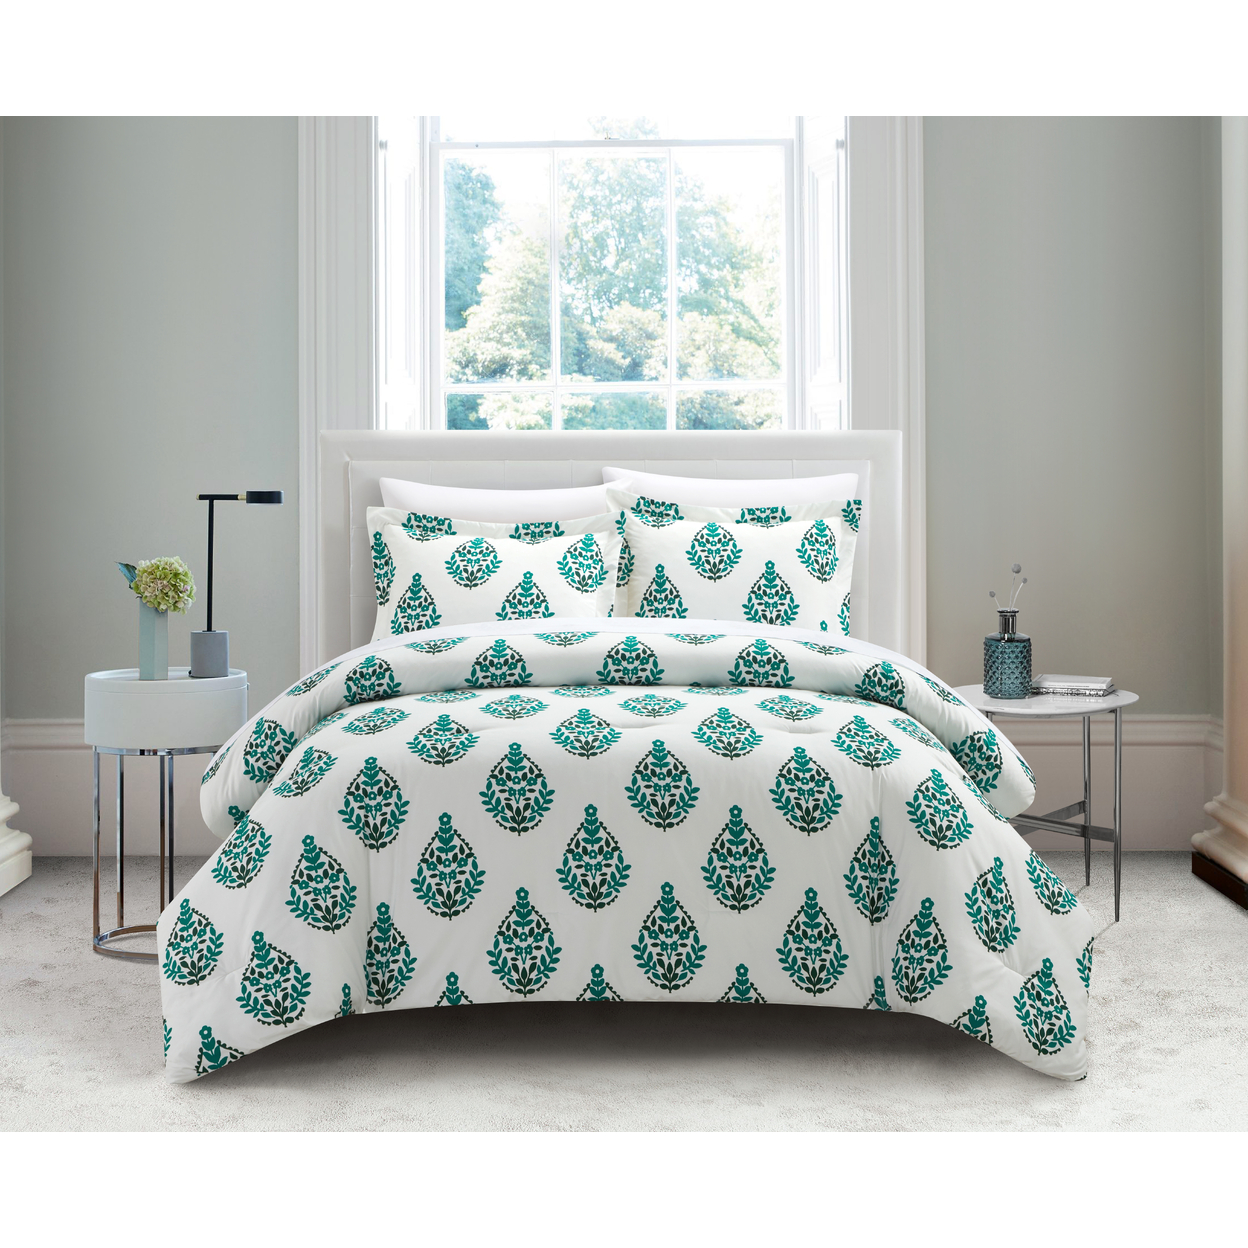 3 Or 2 Piece Duvet Cover Set Print Design With Zipper Closure - Everly Green, King